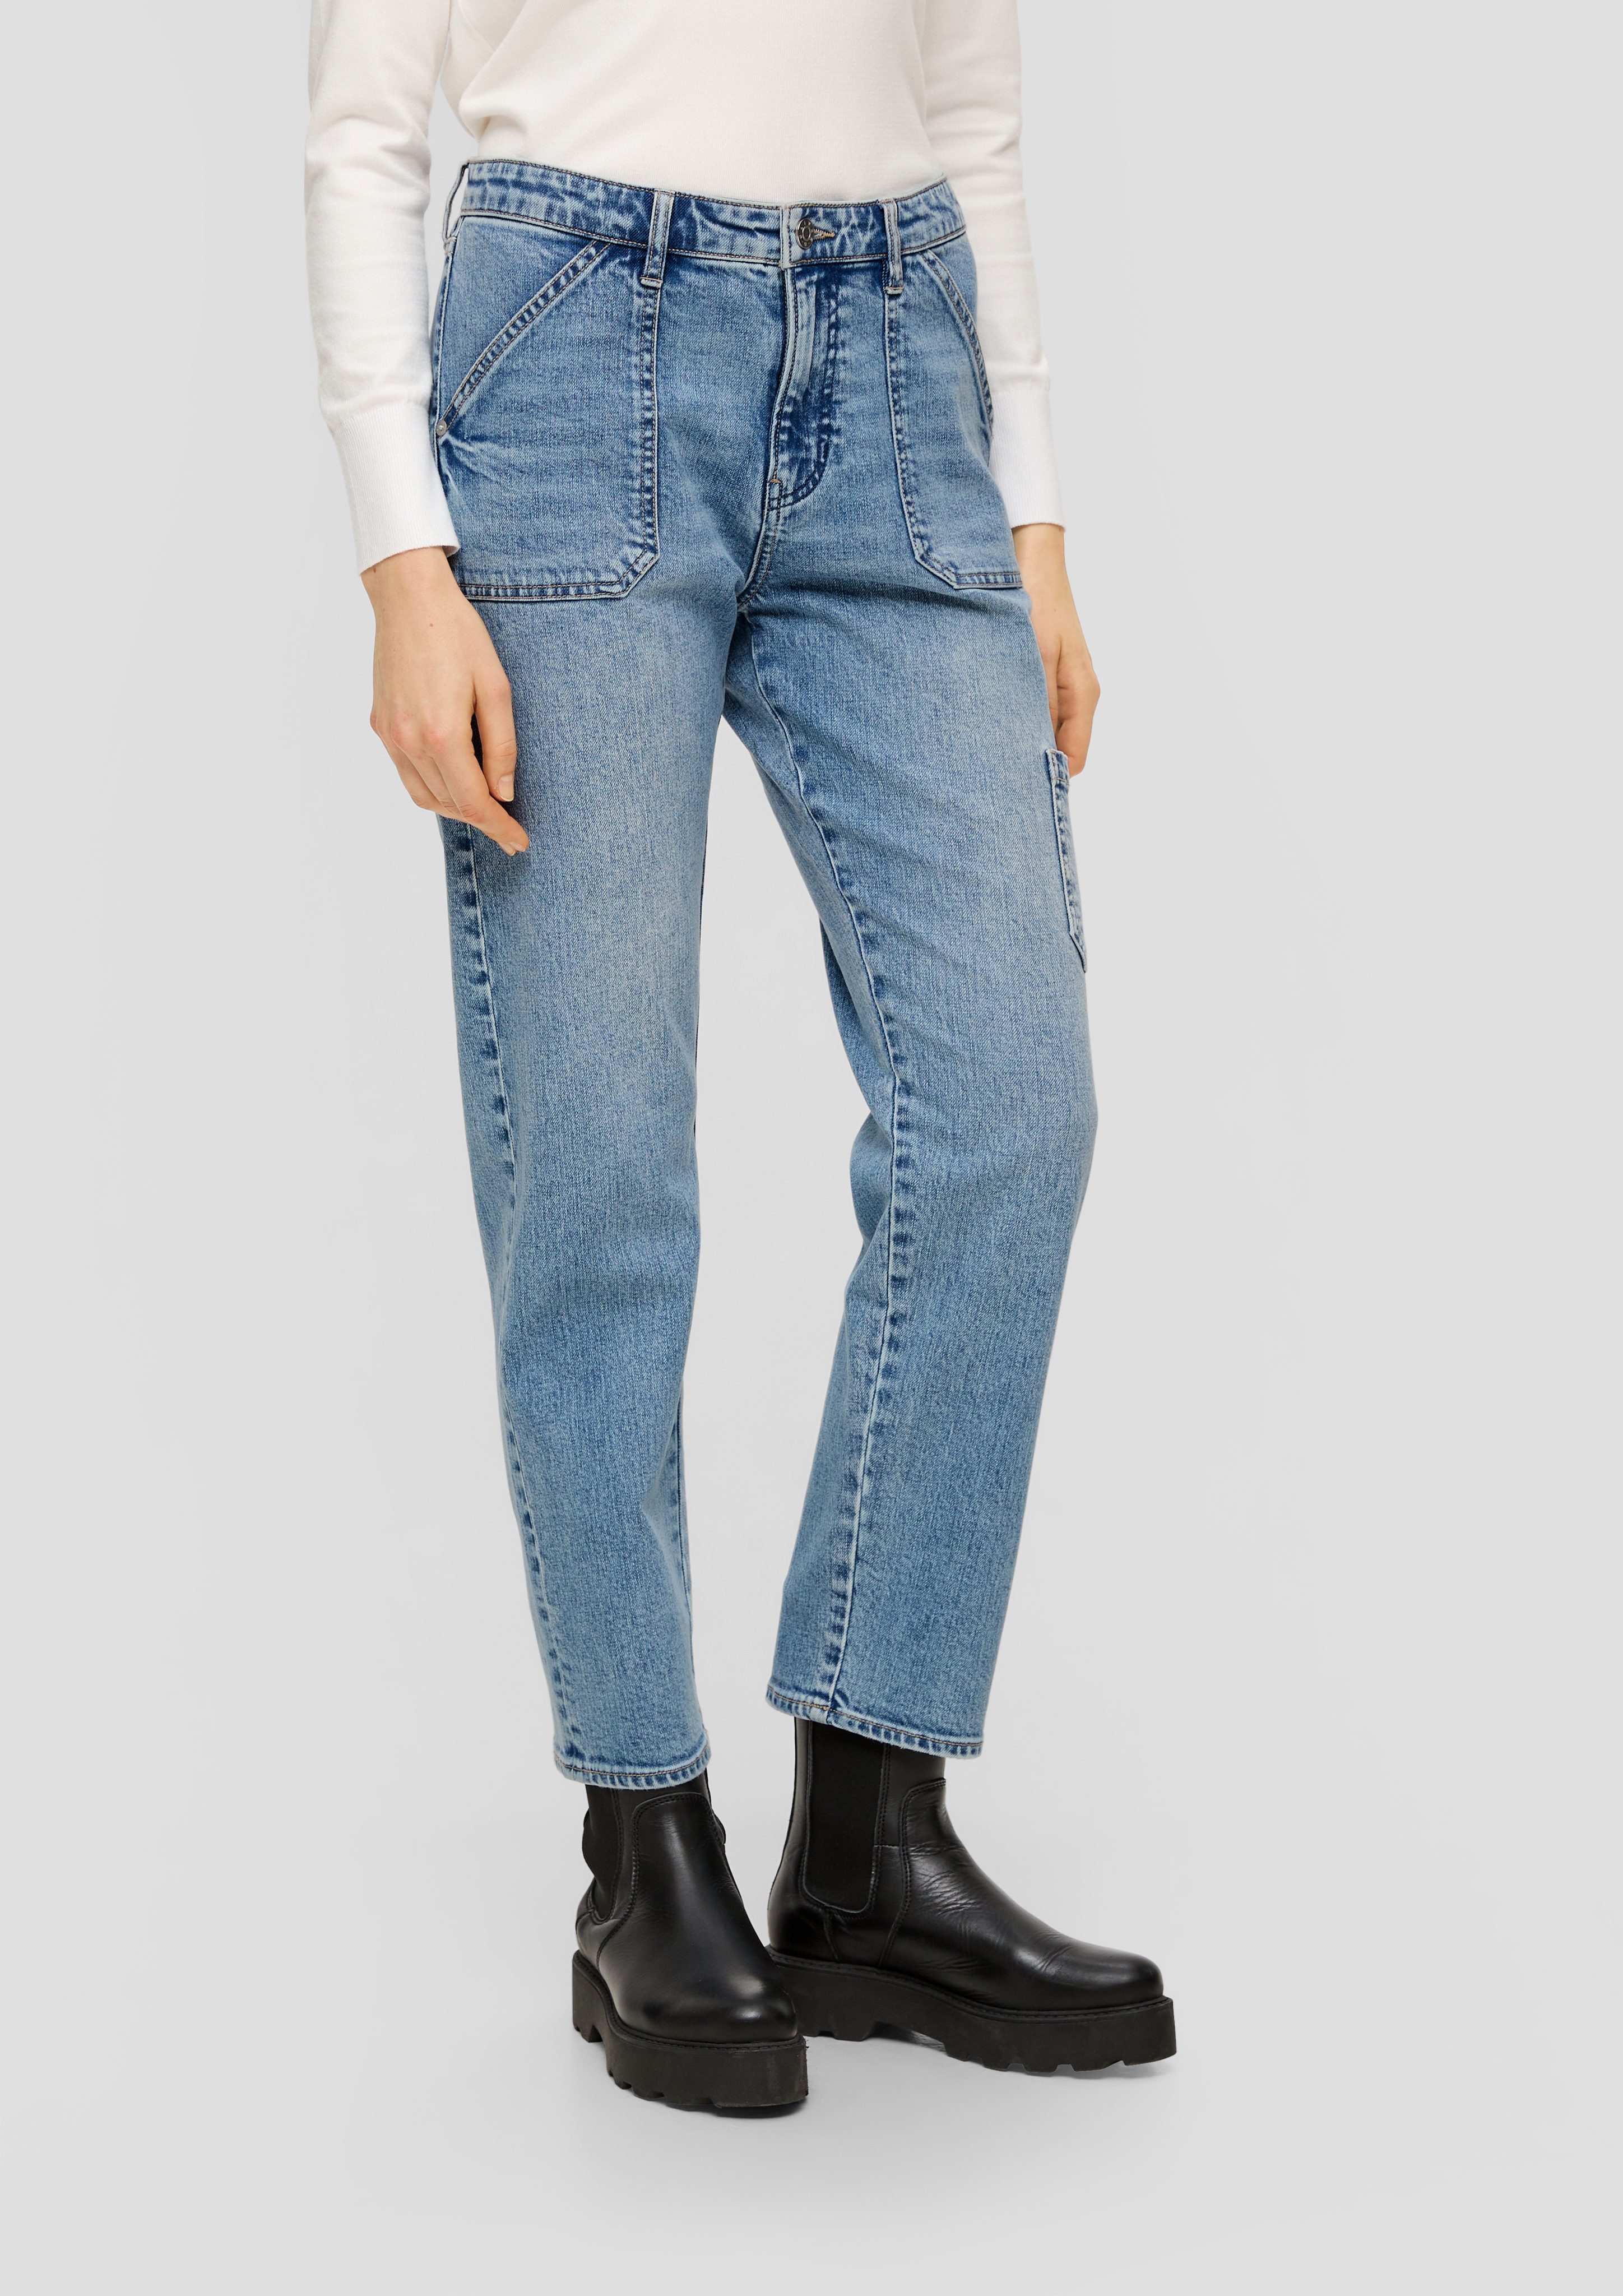 s.Oliver 7/8-Jeans Label-Patch, Jeans / Slim / Mid Relaxed Straight / Boyfriend Waschung Leg Rise Ankle Fit